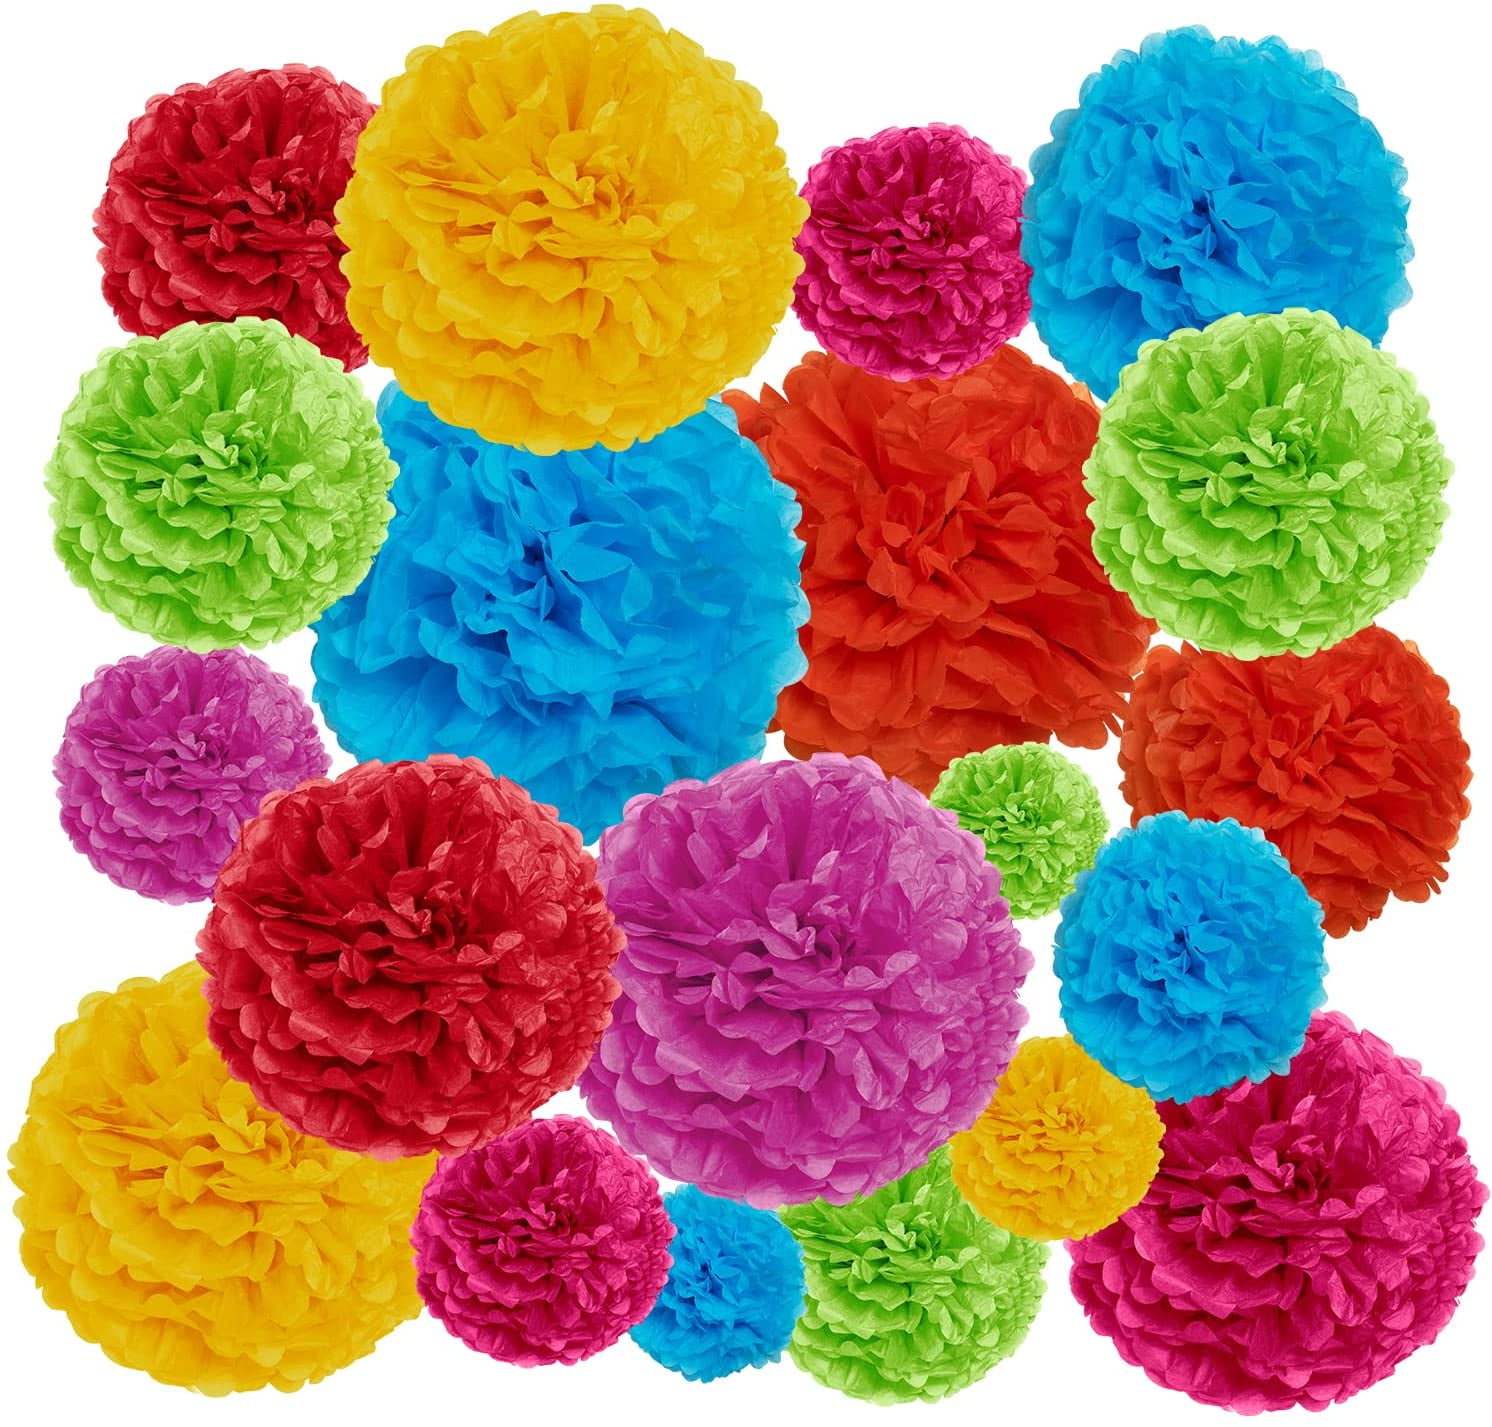 THAWAY Birthday Decorations Party Supplies Colorful Birthday Decorations Happy Birthday Banner Pom Poms Flowers Garland Hanging